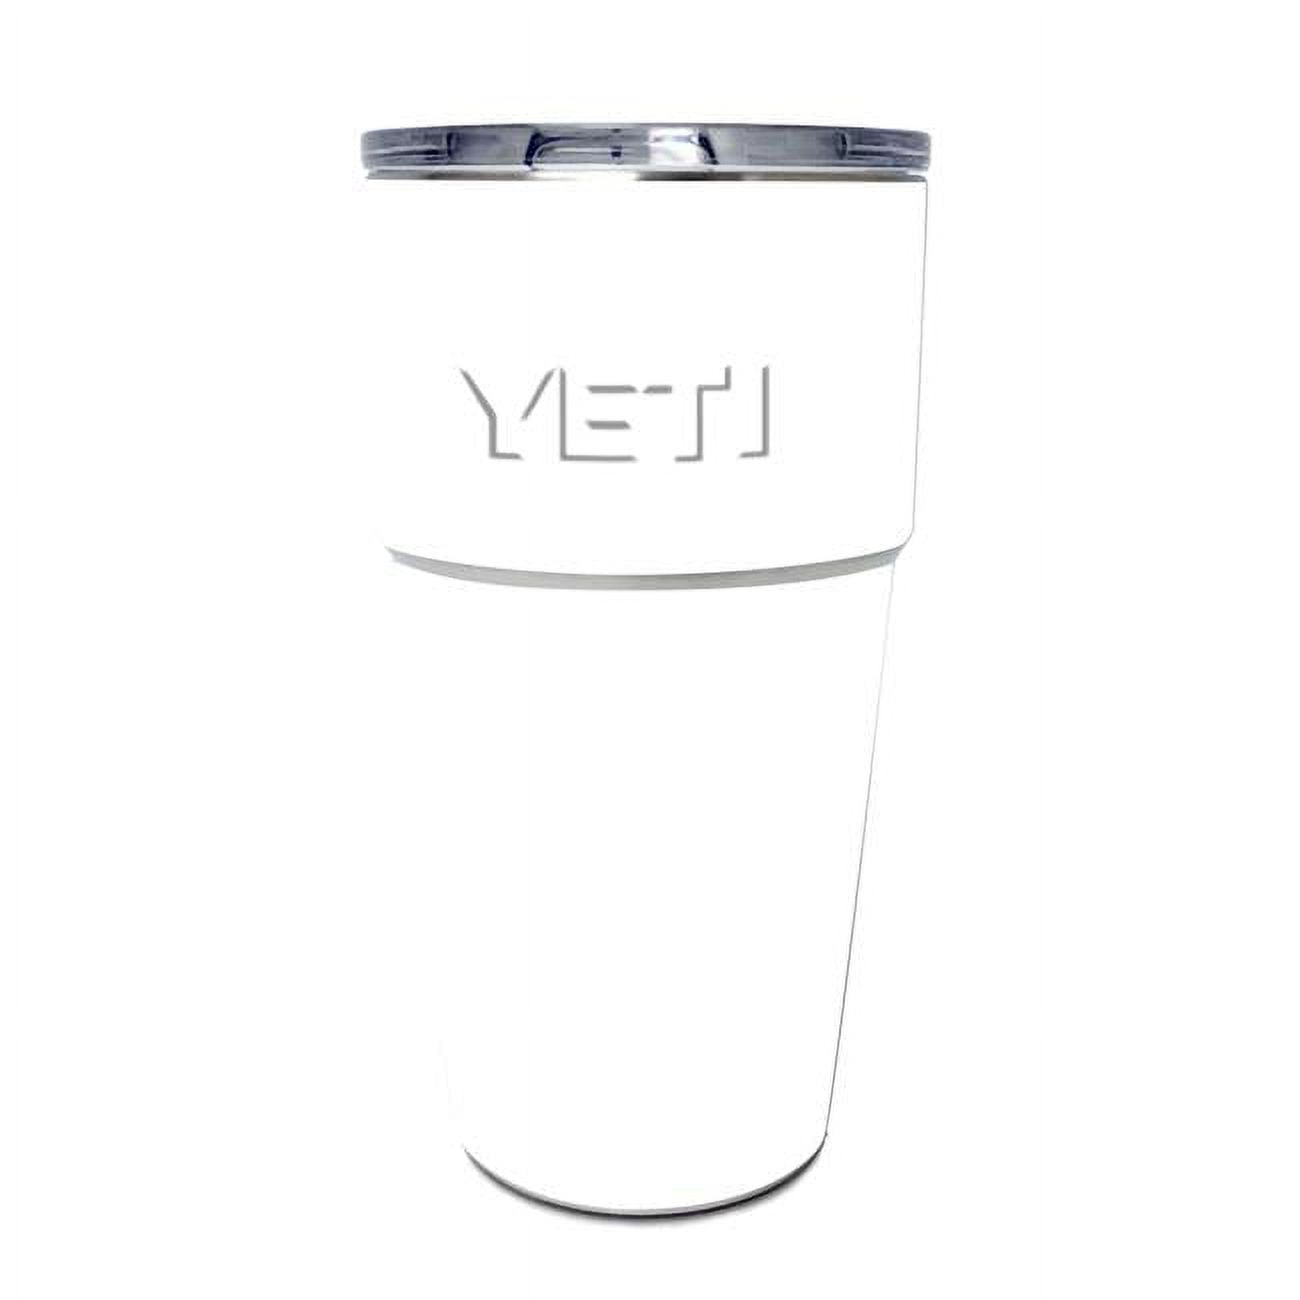 MightySkins YEPINT16-Tacos Skin for Yeti Rambler 16 oz Stackable Pints -  Tacos - Pack of 2, 1 - Kroger